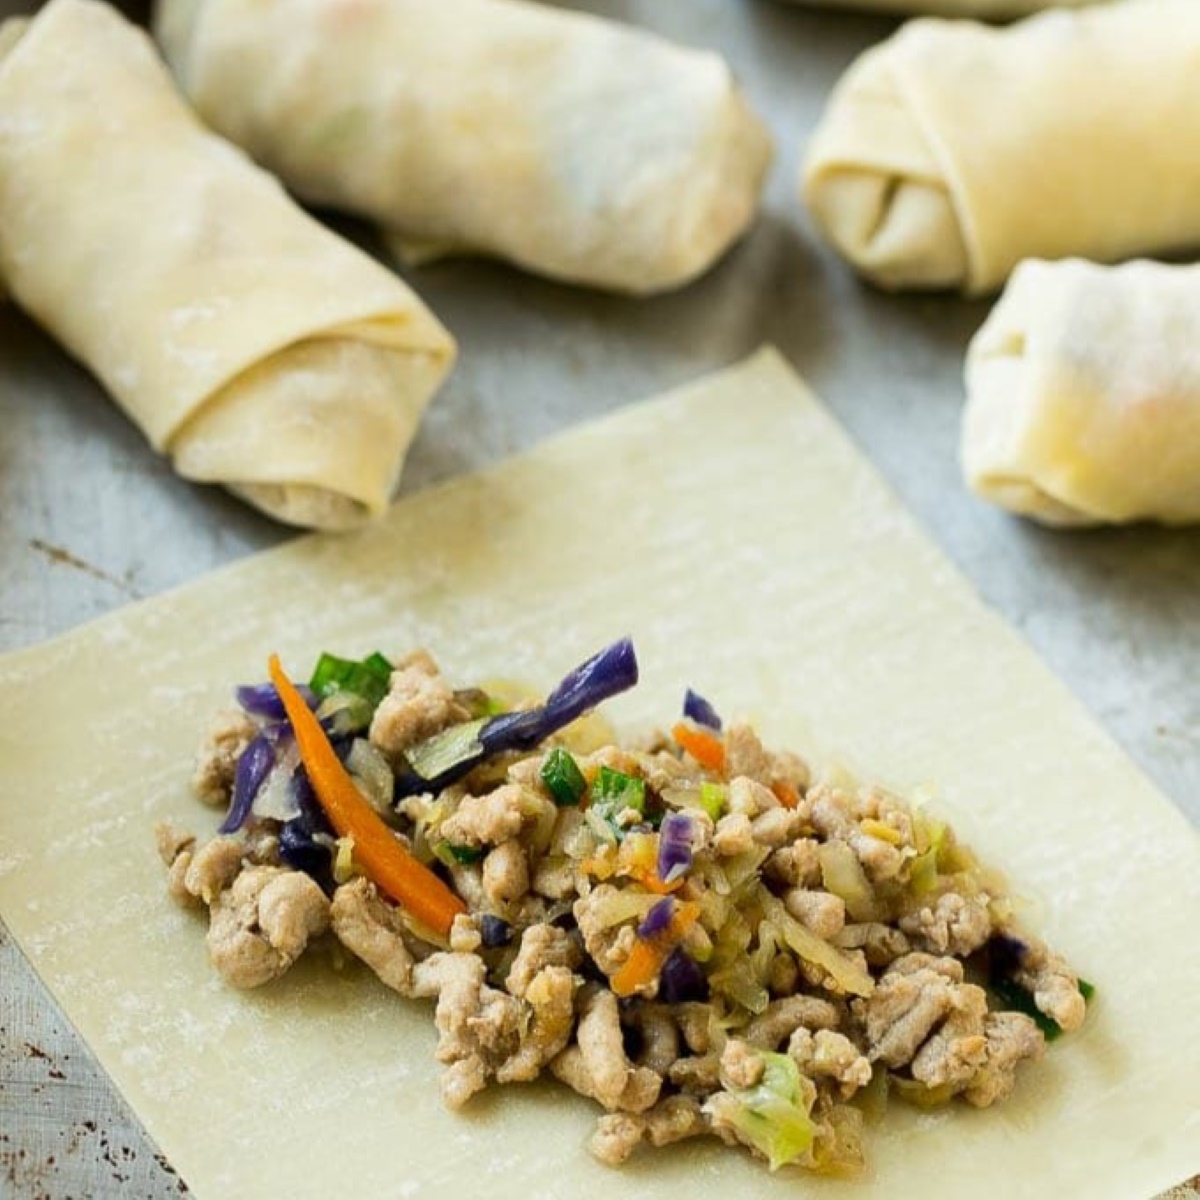 How To Store Egg Rolls Before Frying